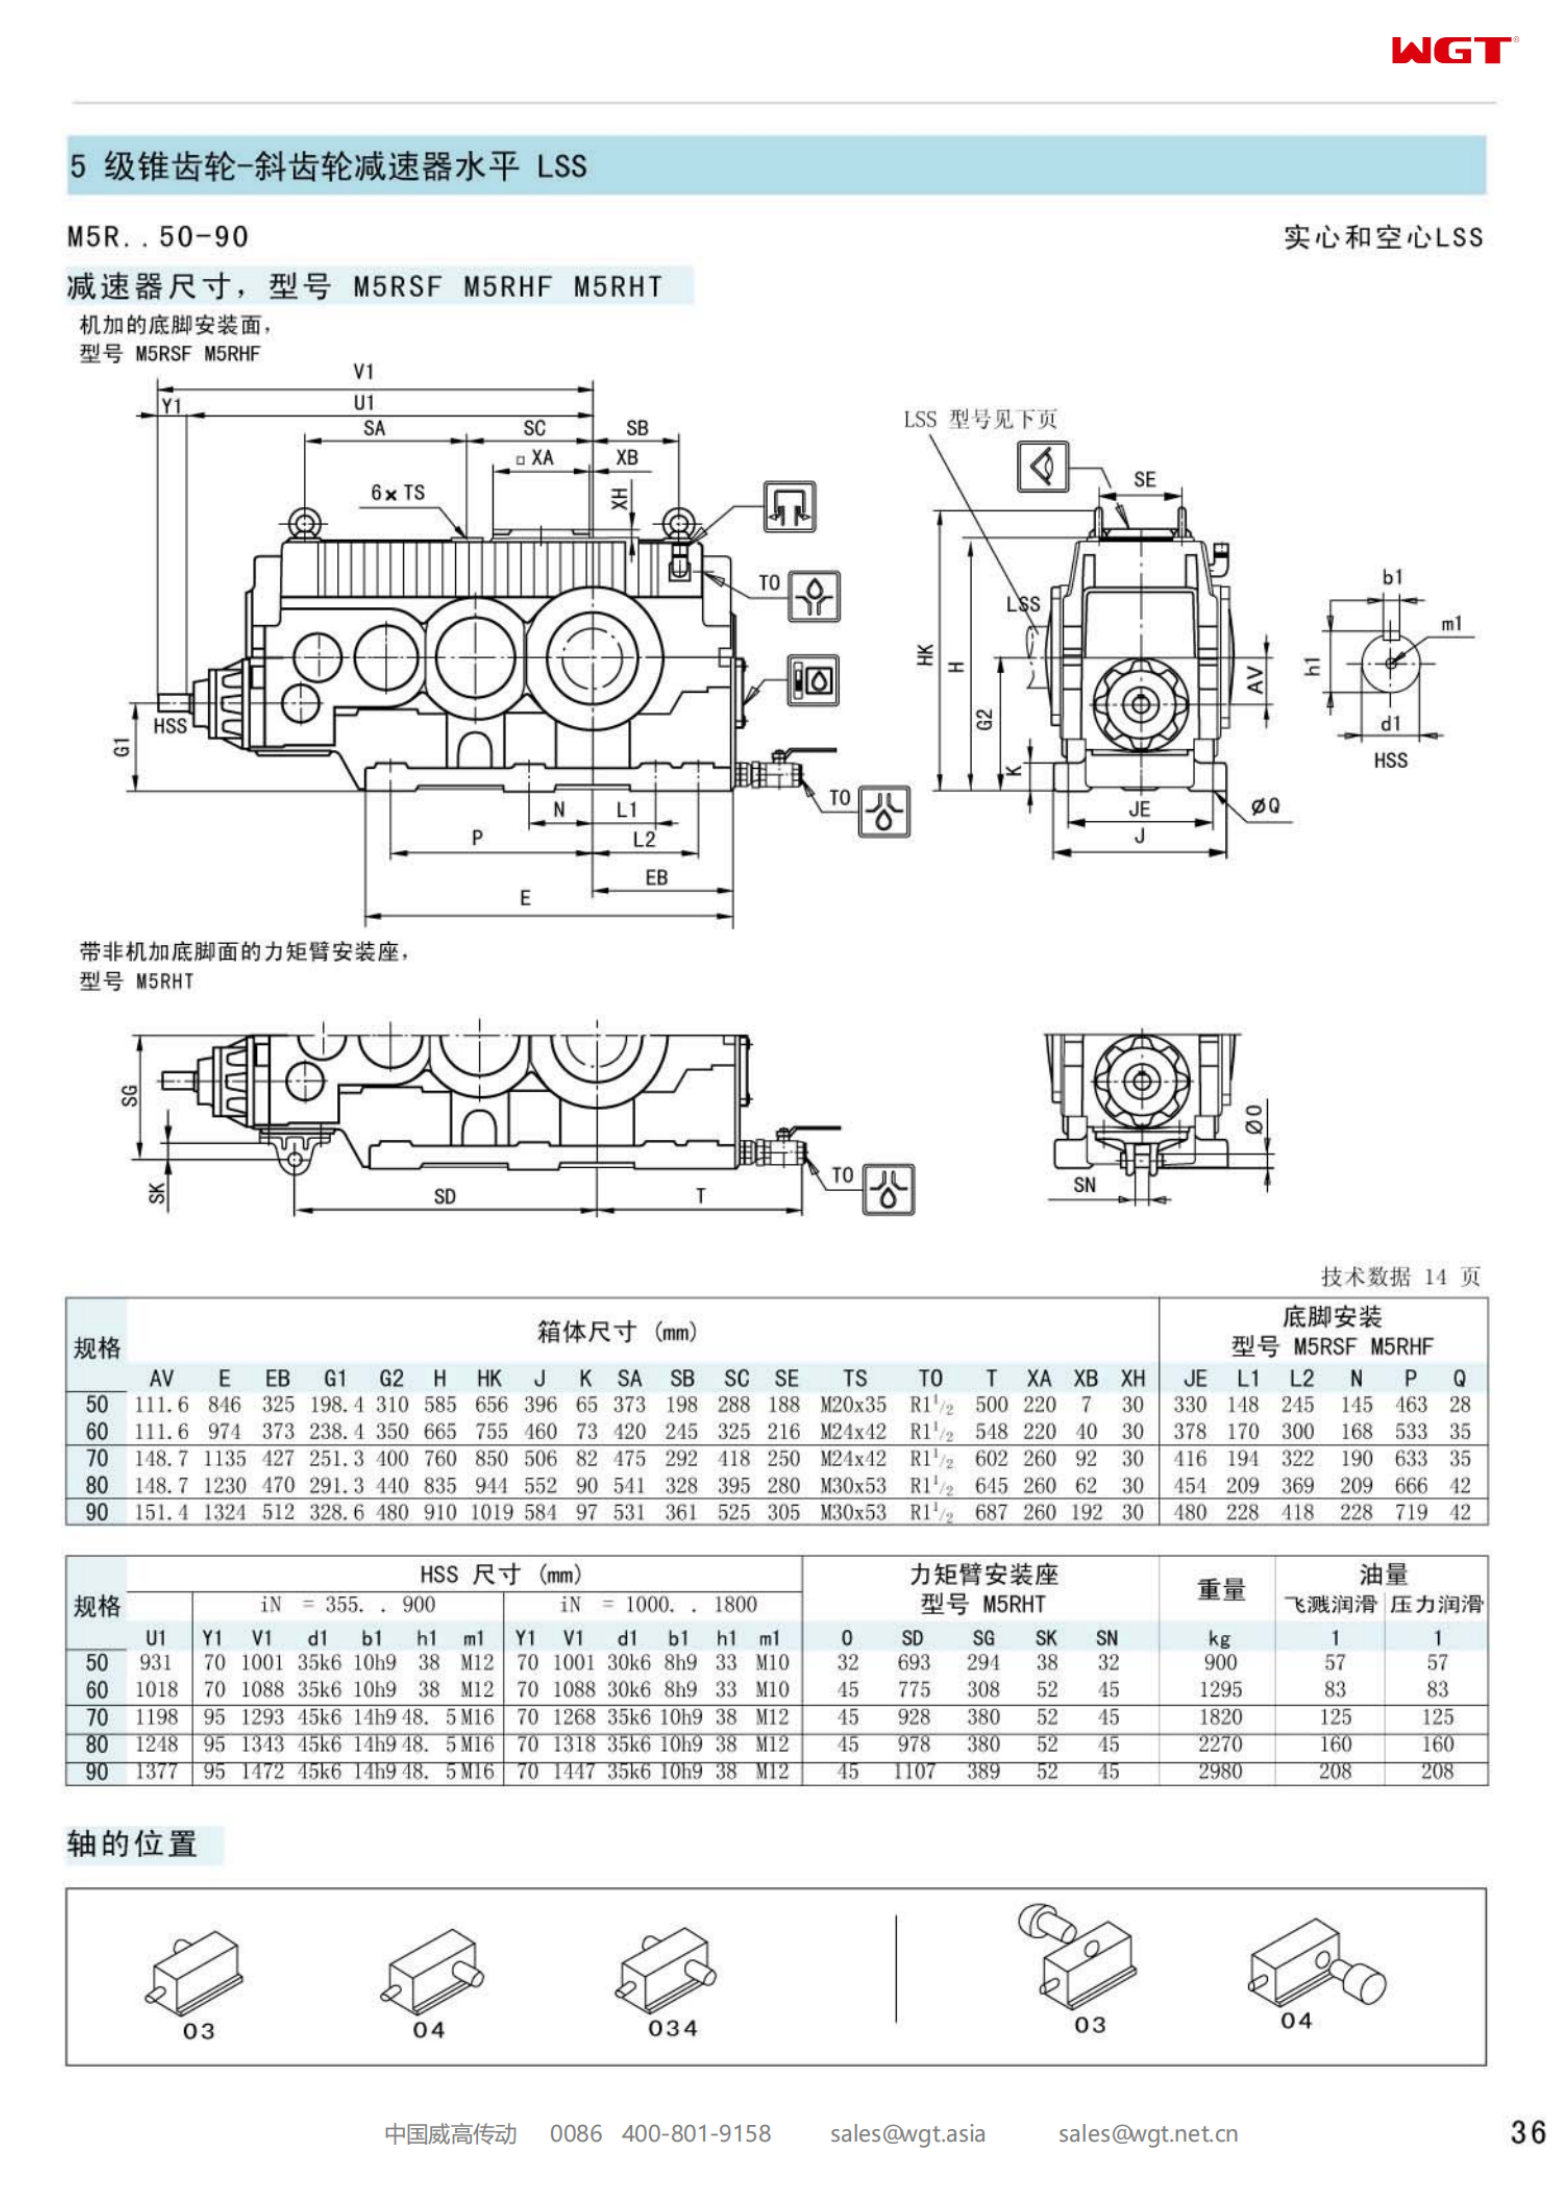 M5RHF90 Replace_SEW_M_Series Gearbox